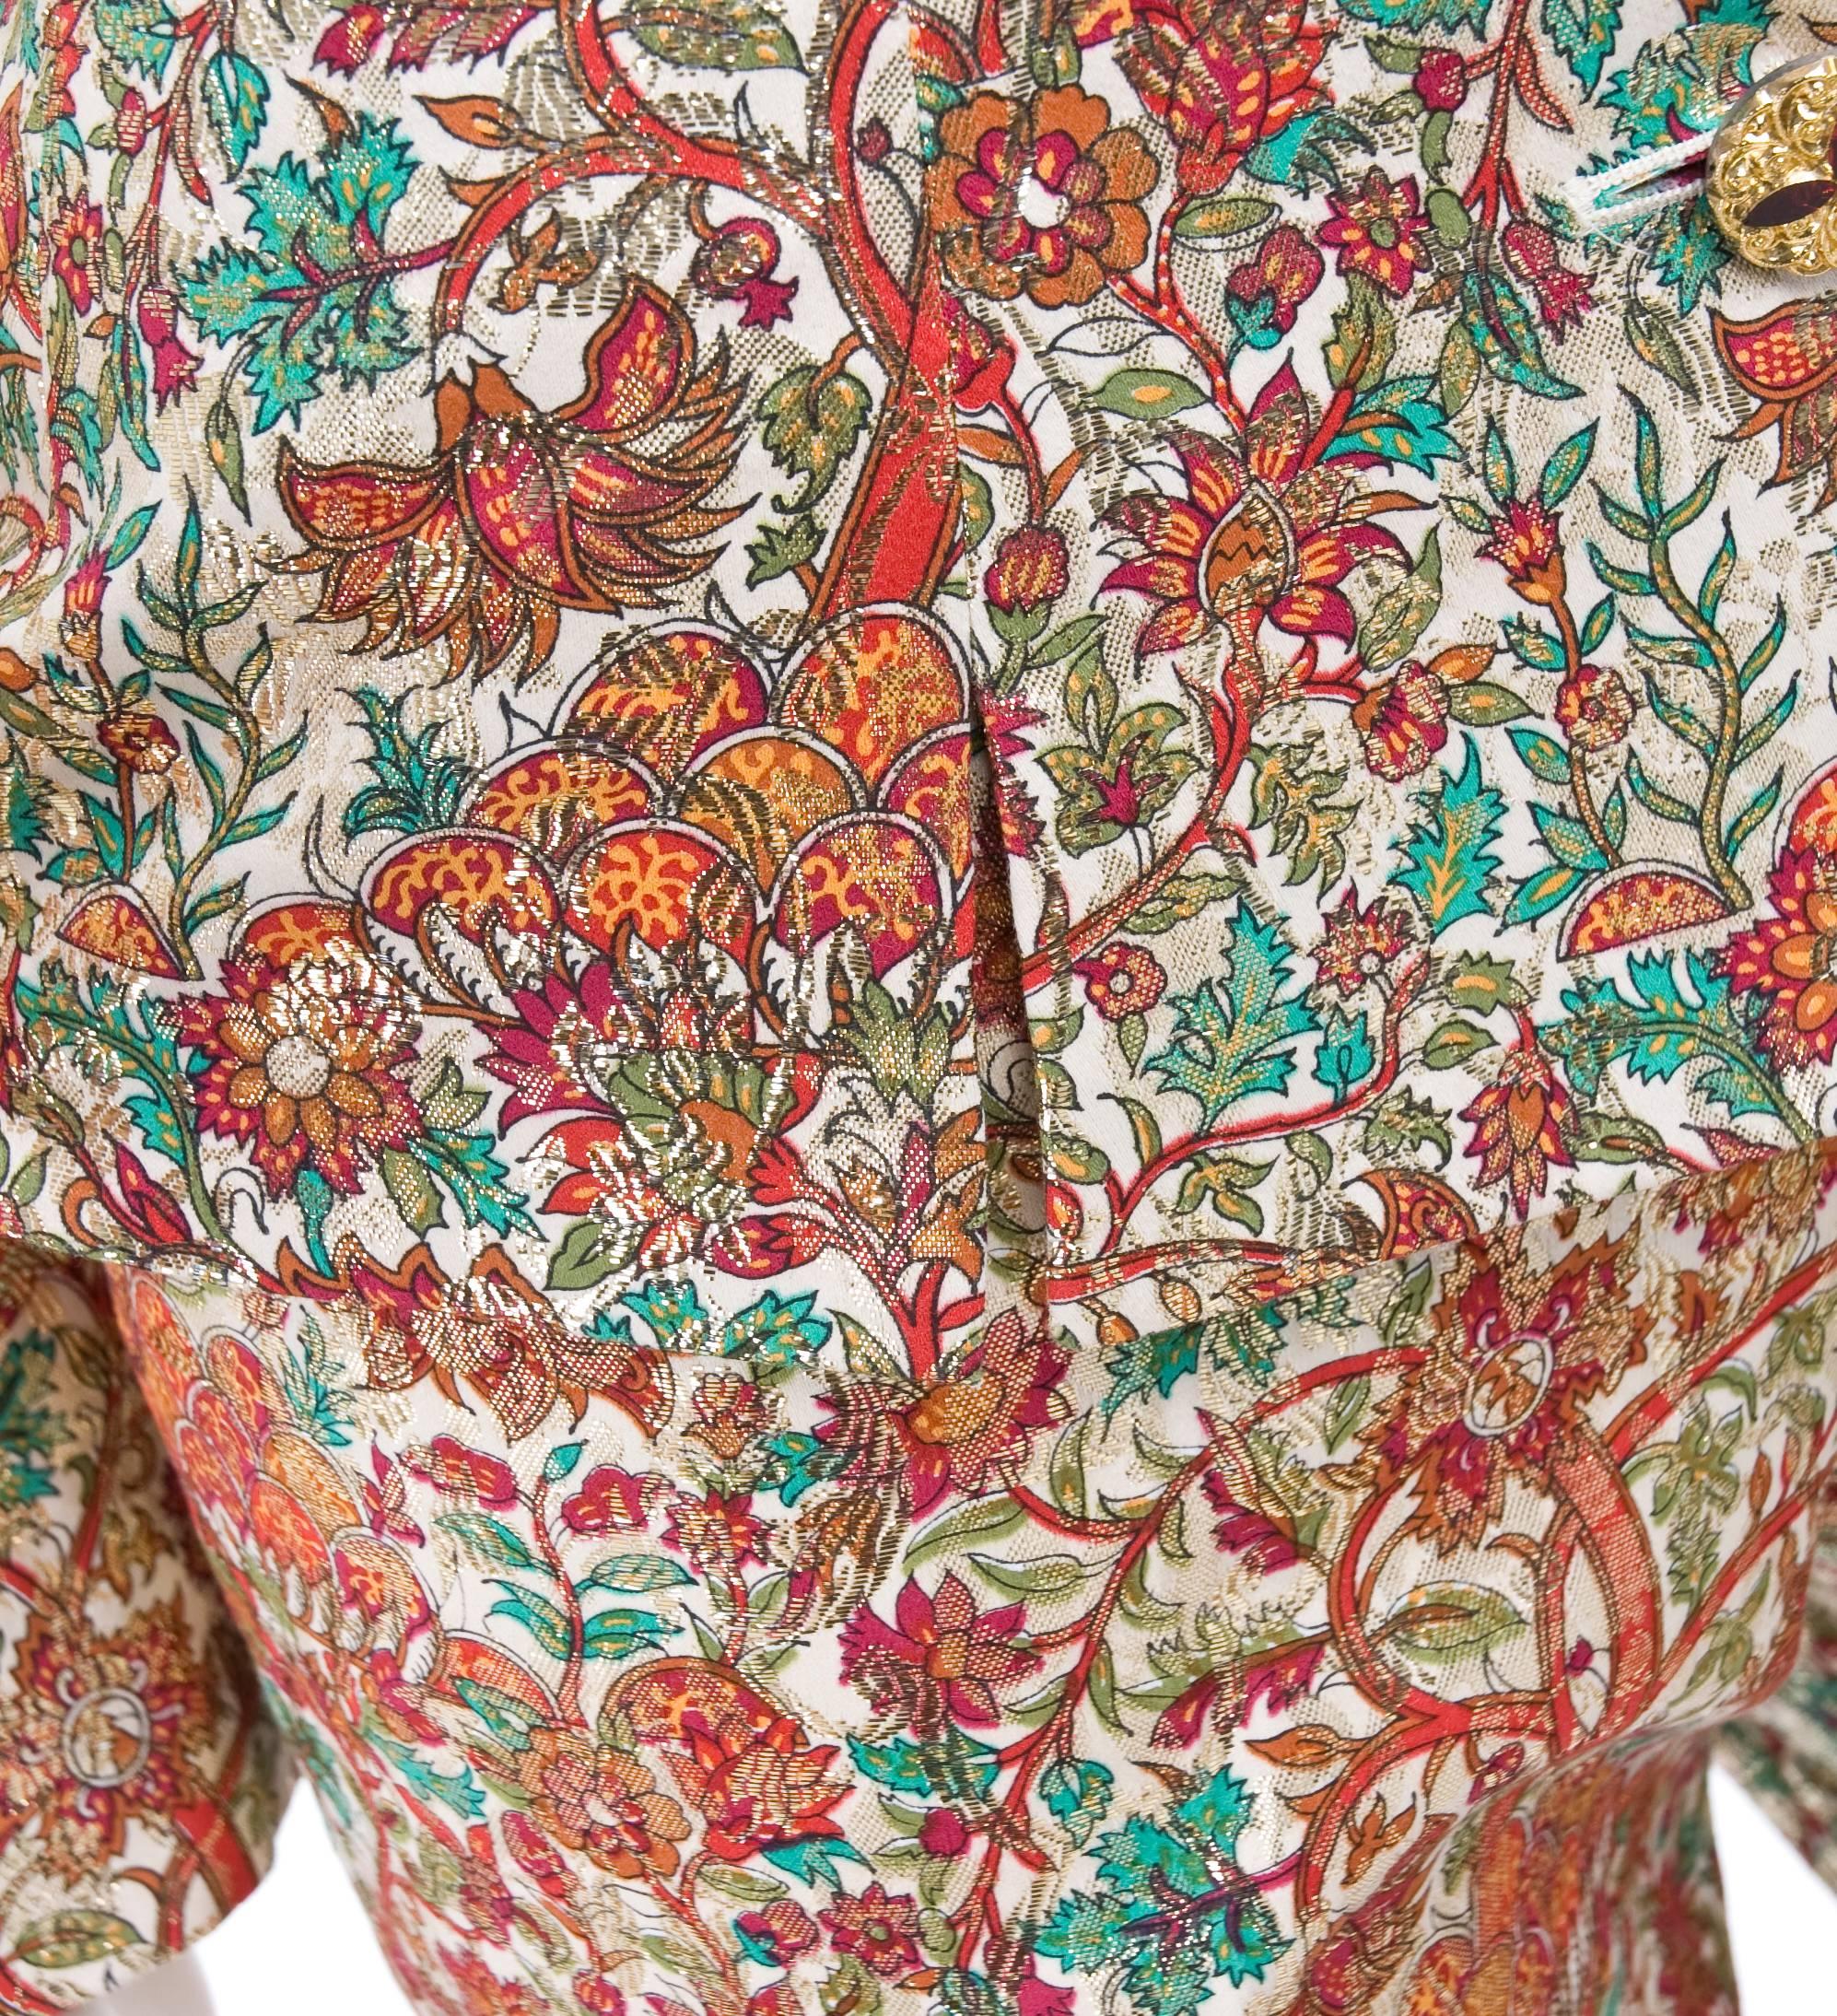 Vintage Yves Saint Laurent Brocade Suit in Gold, Red and Green For Sale 3